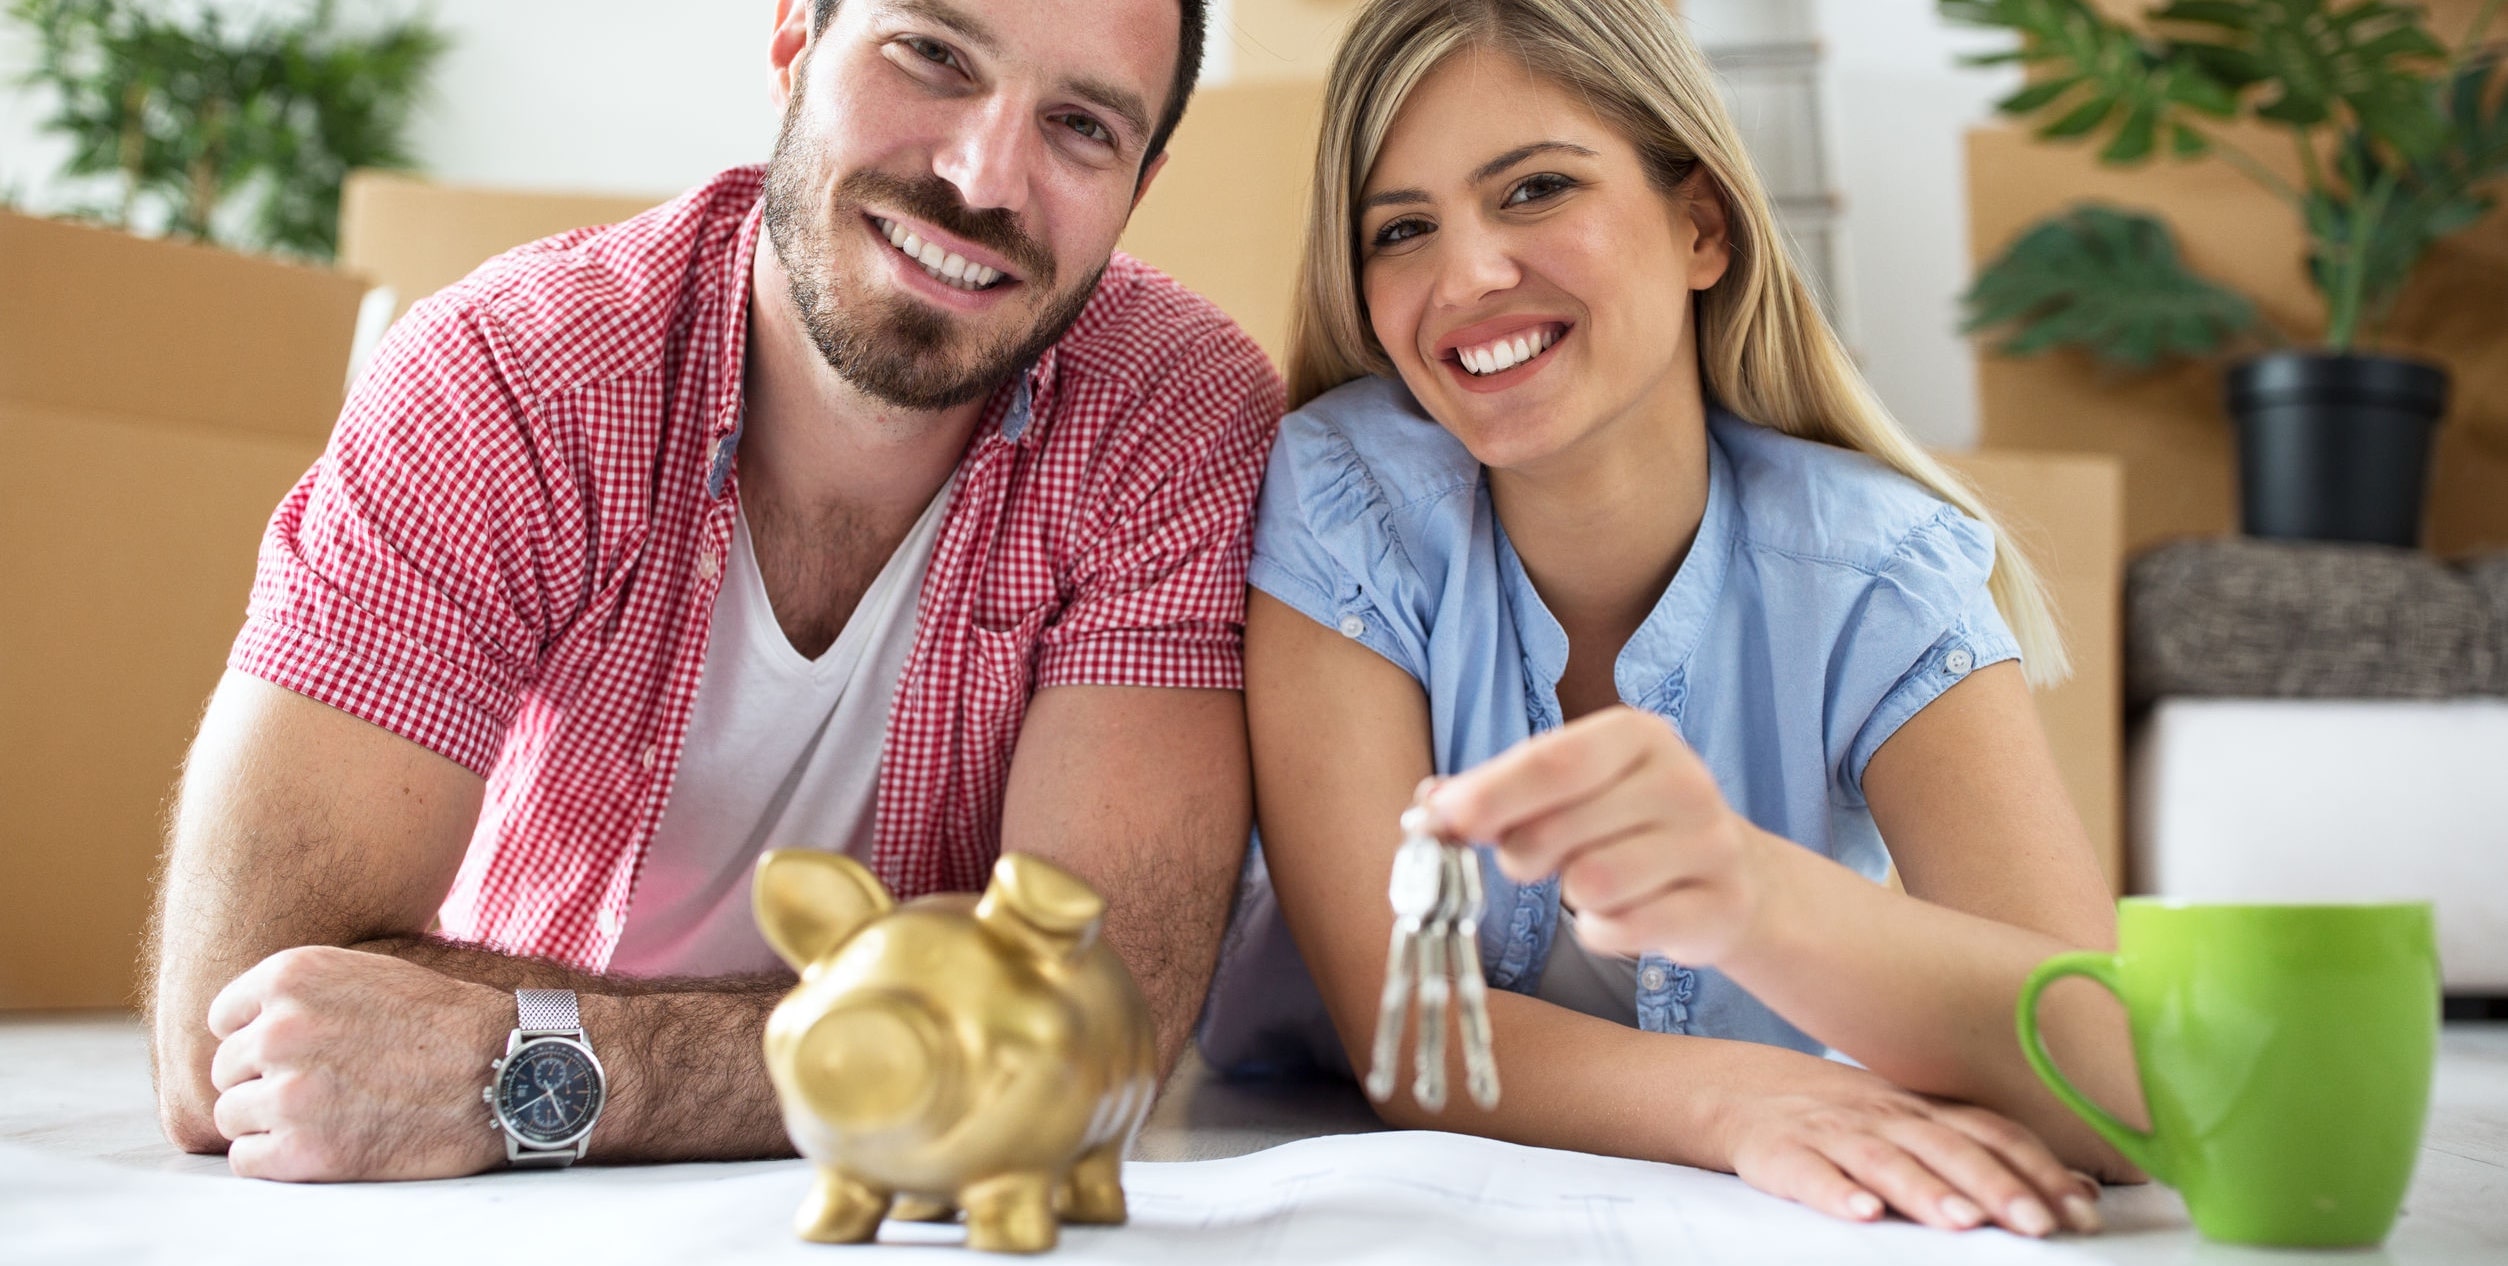 Couple holding keys to new house in front of piggy bank